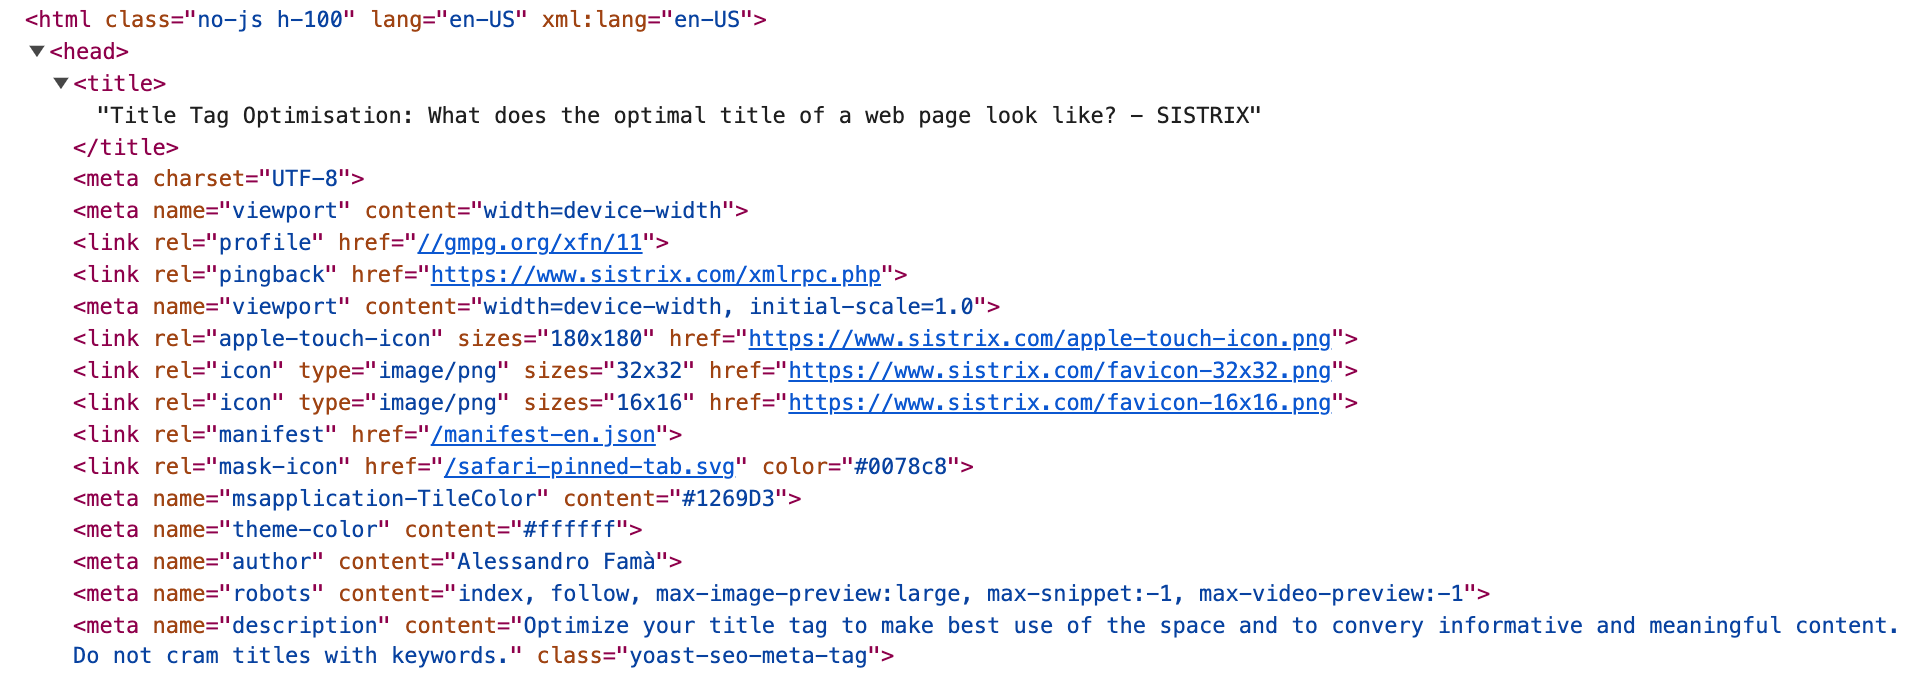 An excerpt of the source code of the SISTRIX guide to title tag optimisation.